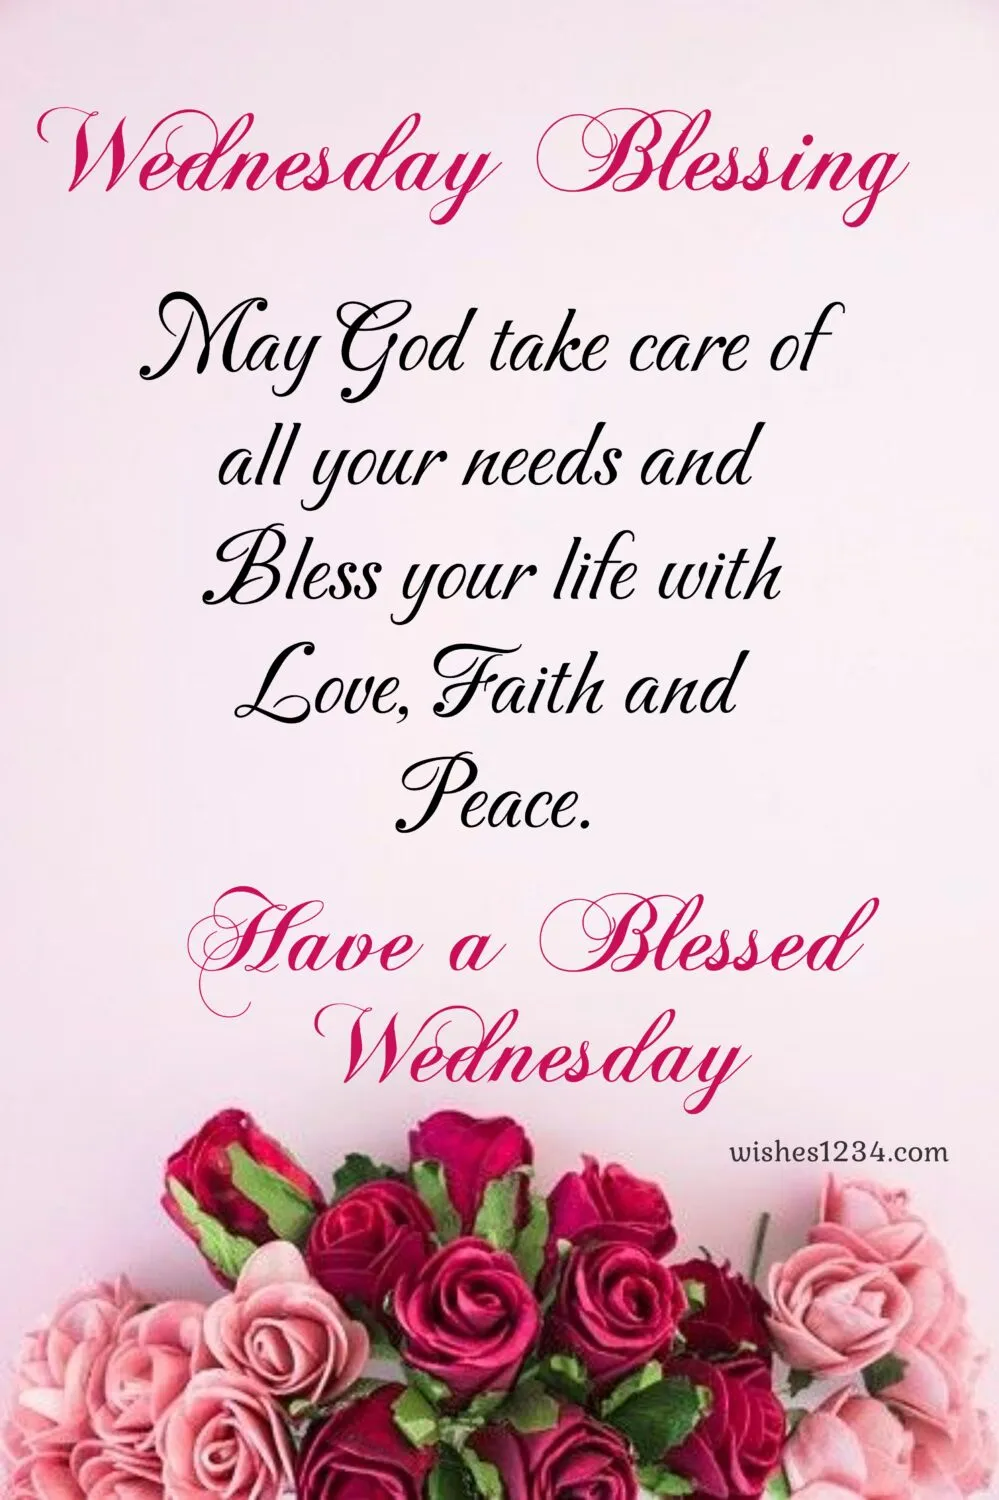 Wednesday Quotes | Wednesday blessings - wishes1234